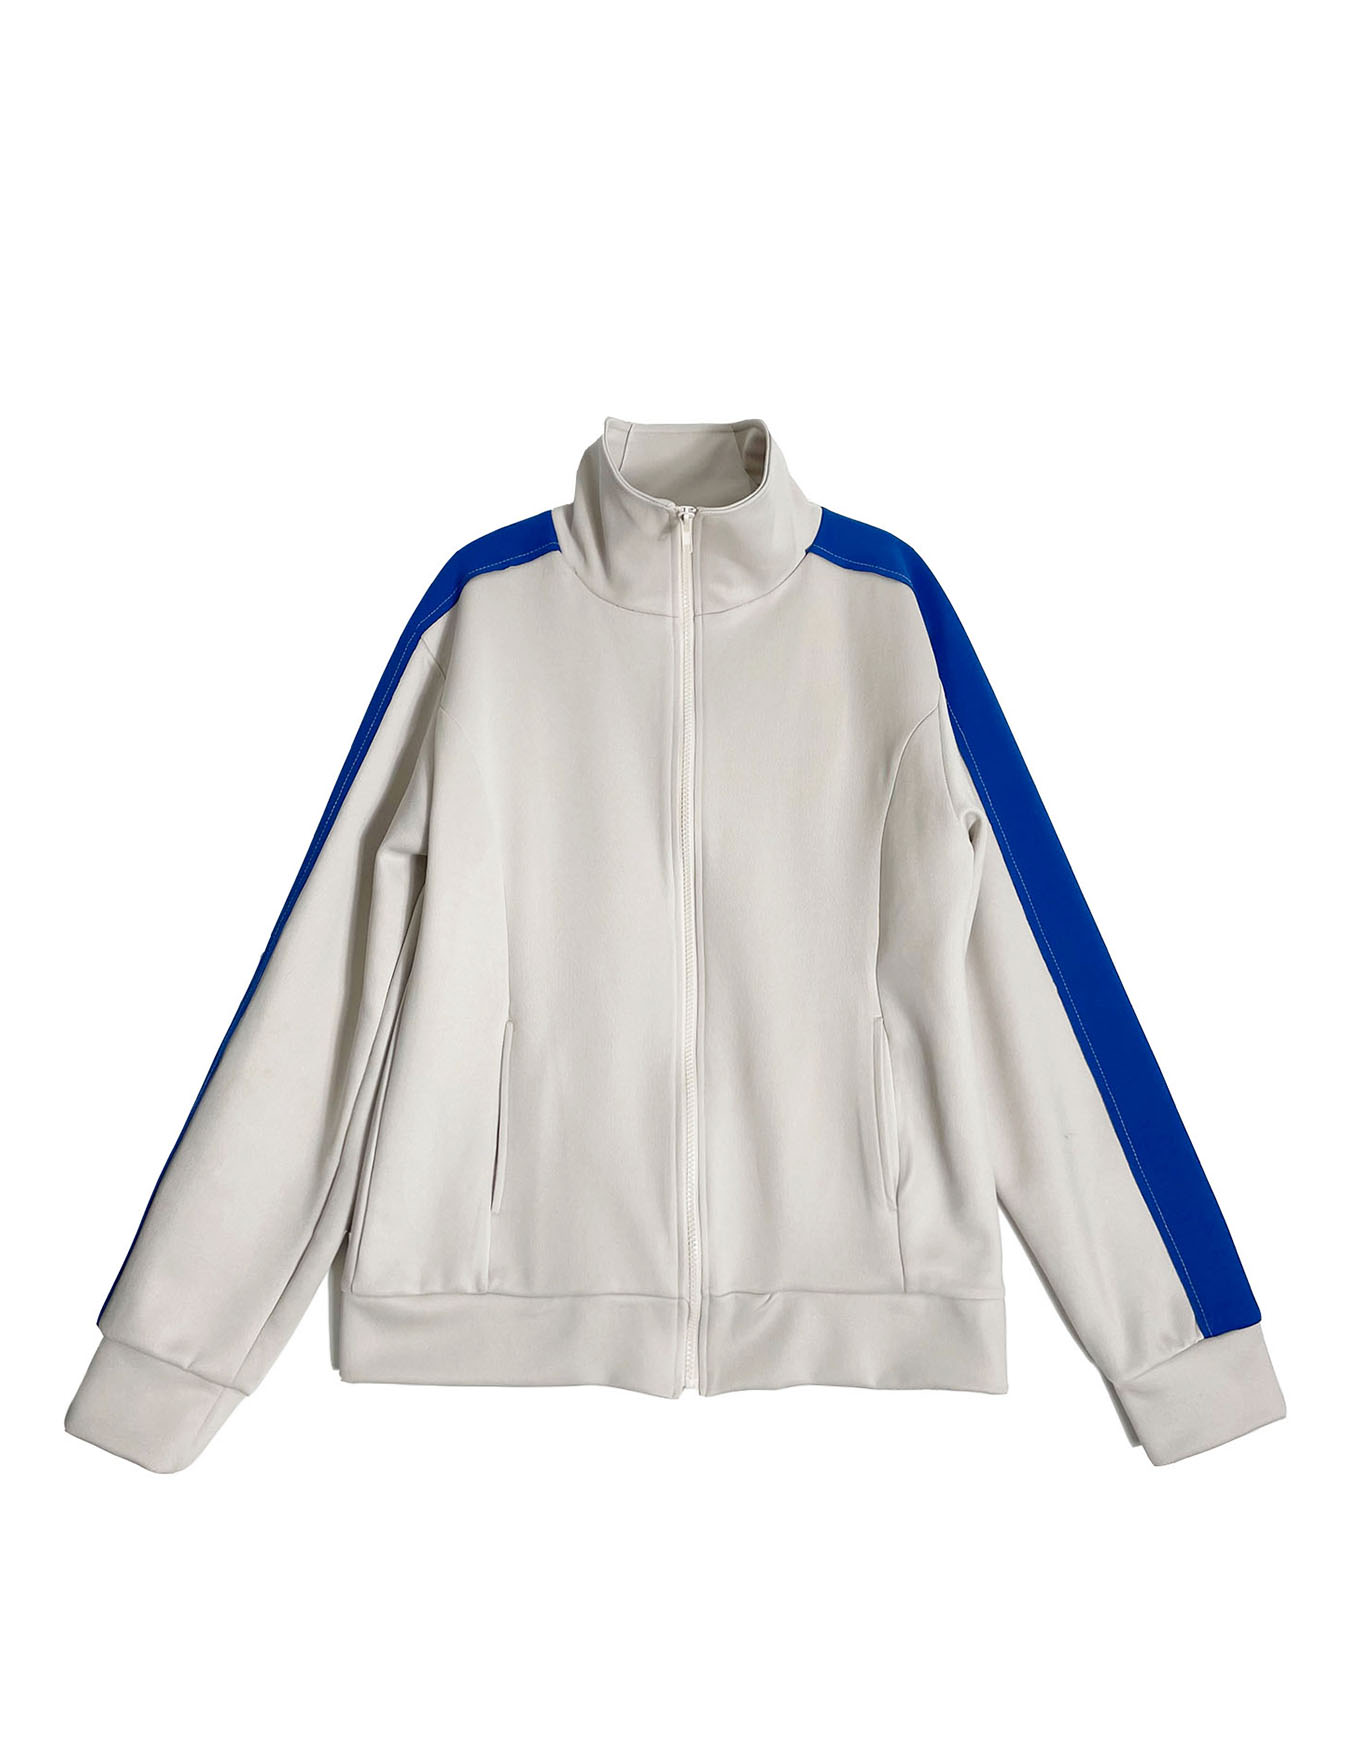 track jersey zip-up (2color)